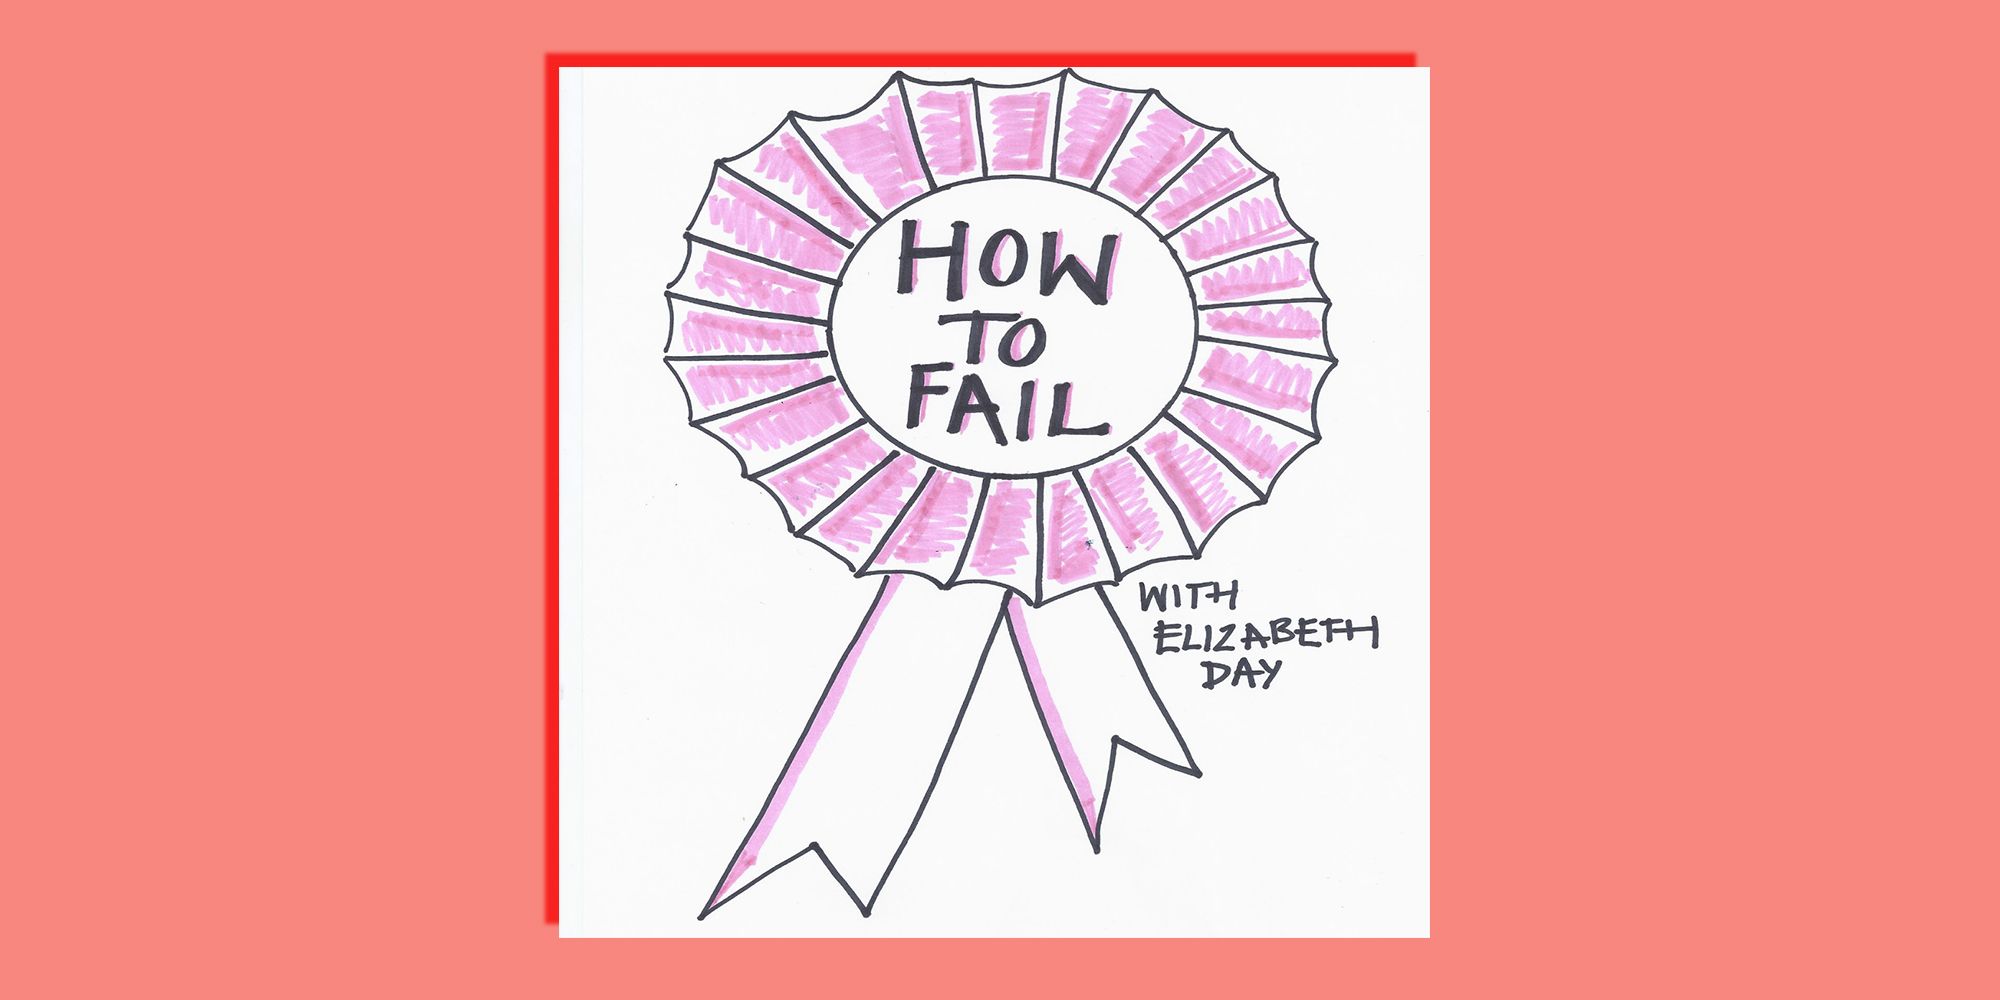 how to fail by elizabeth day